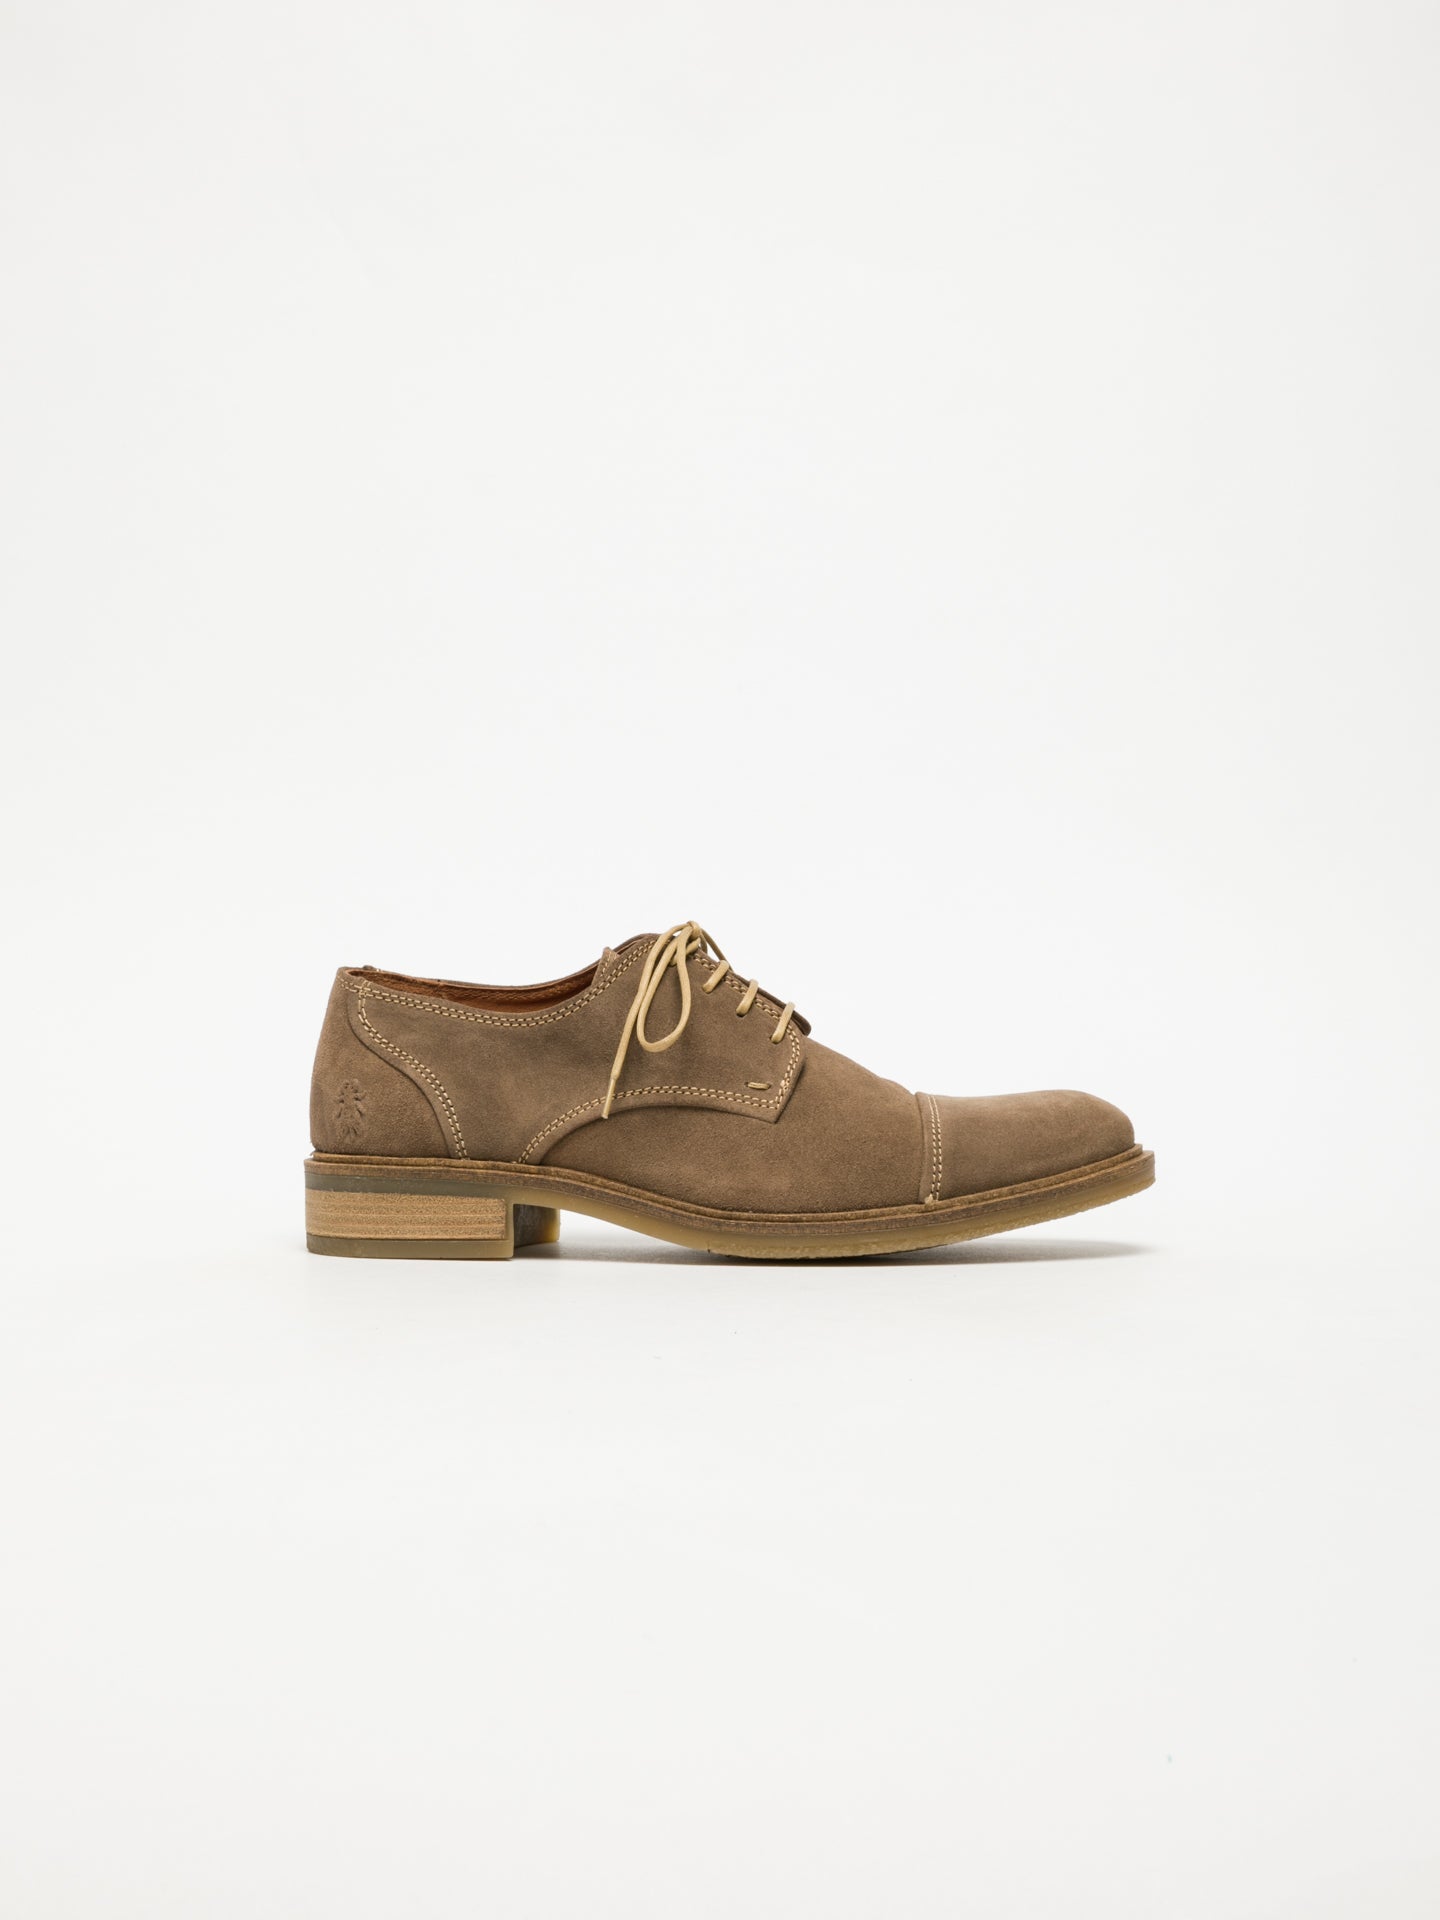 Fly London Tan Derby Shoes